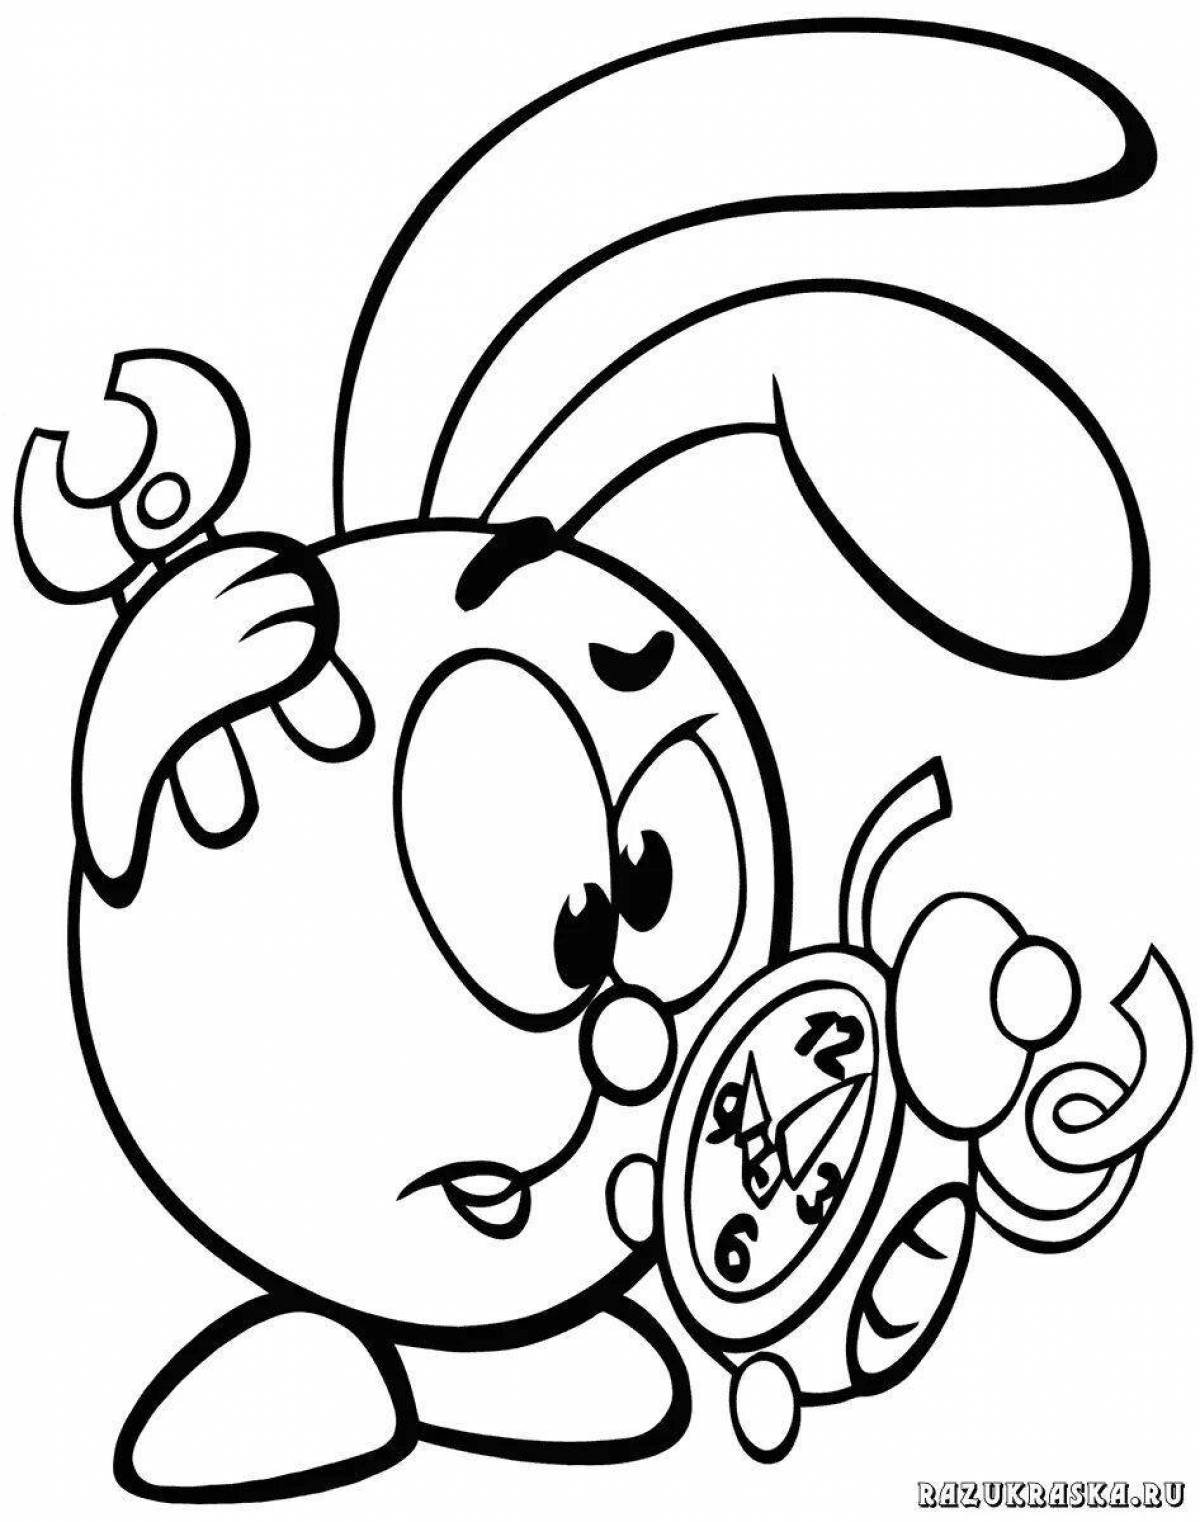 Funny smeshariki coloring pages